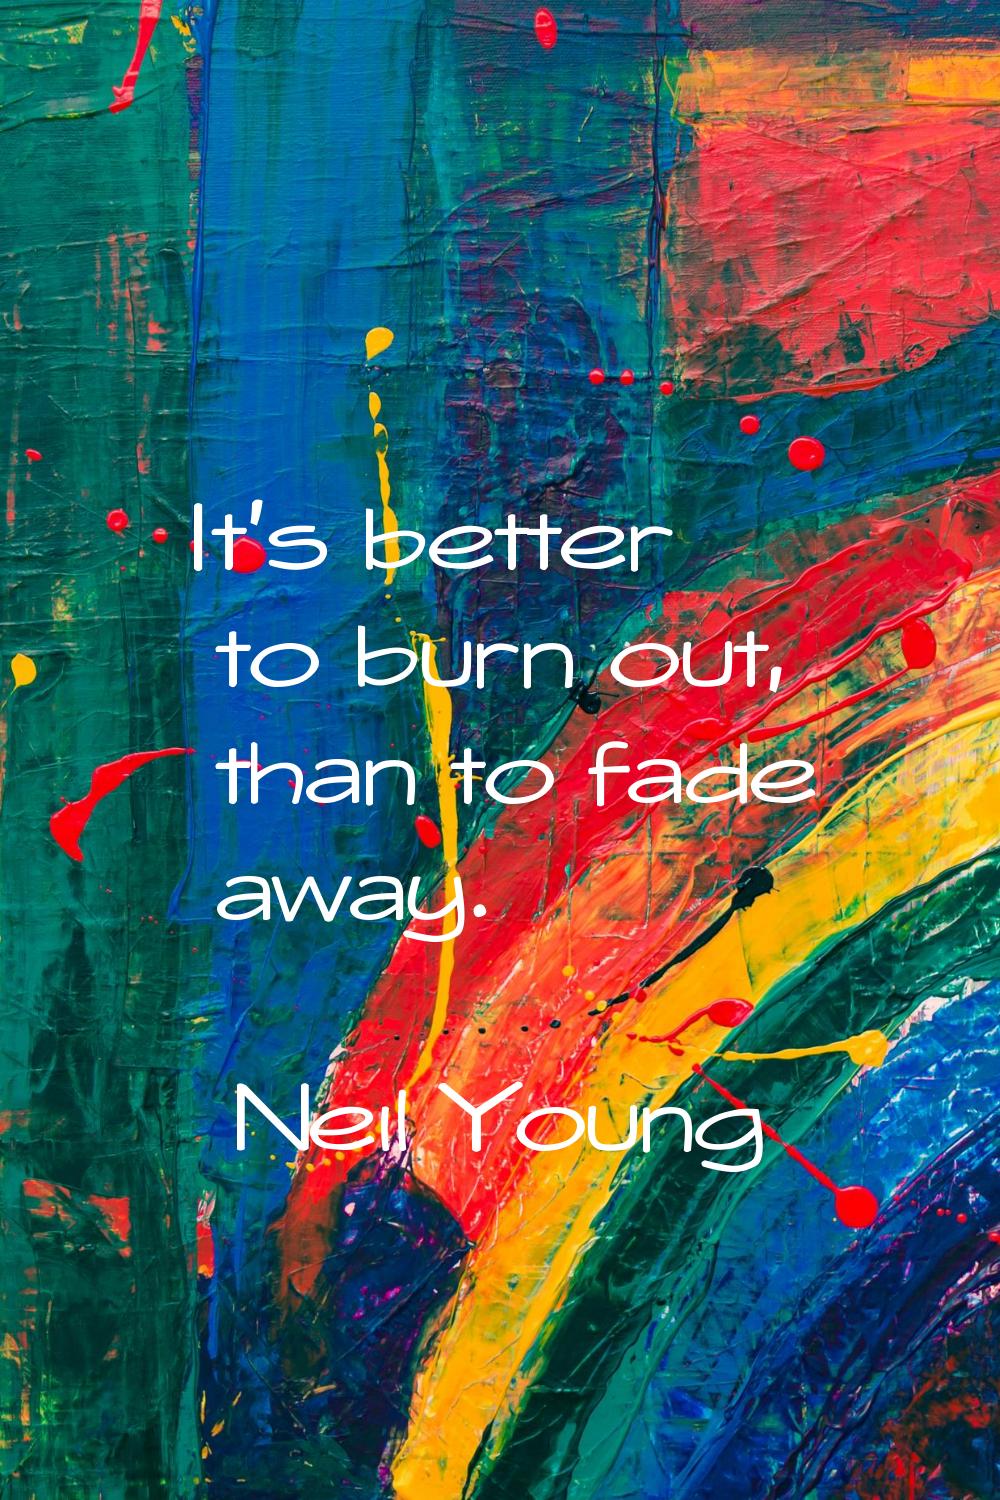 It's better to burn out, than to fade away.